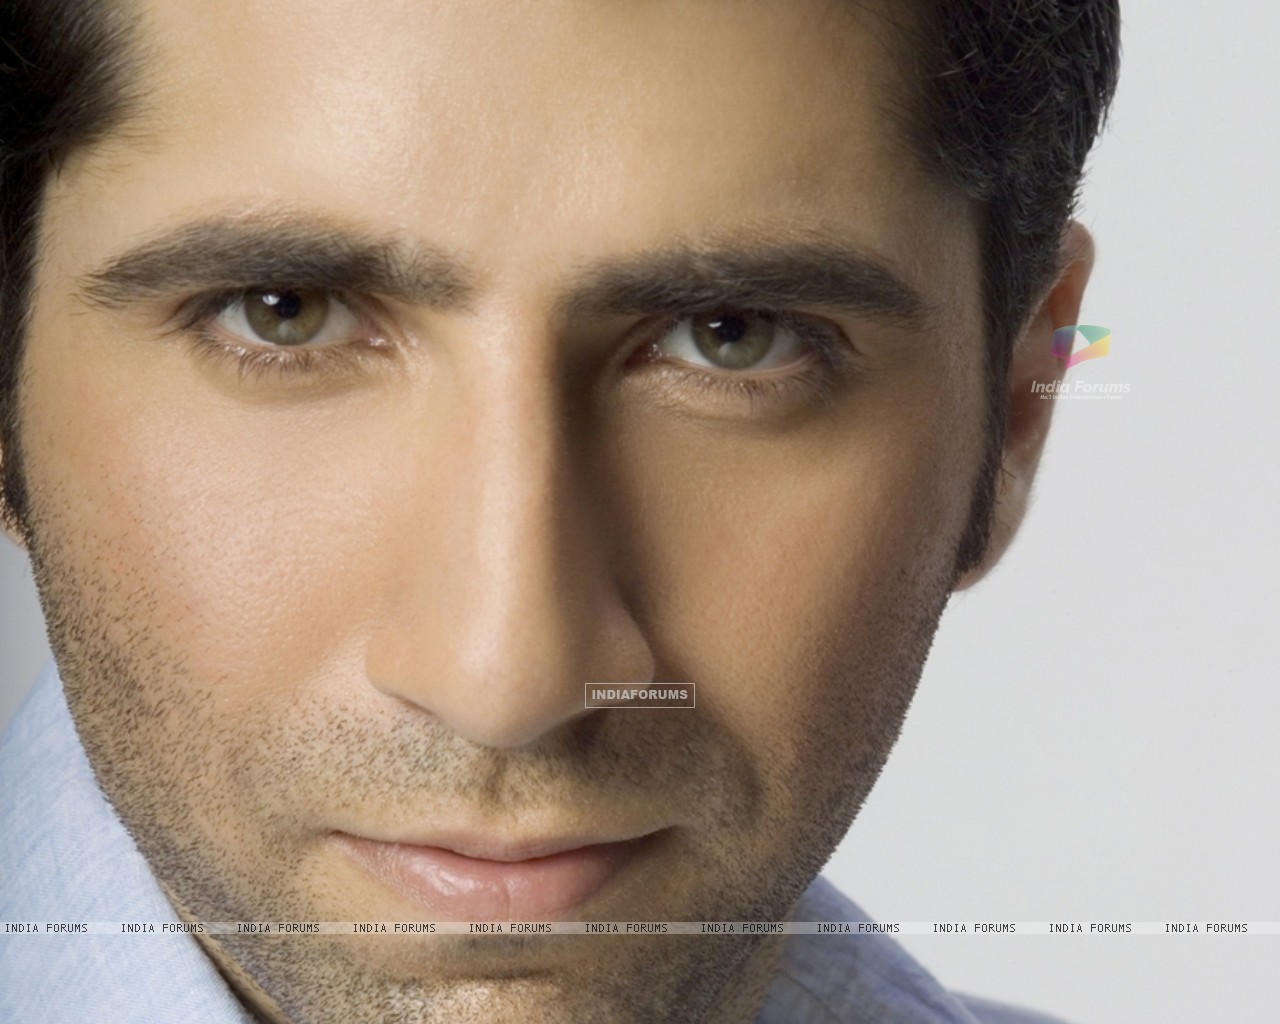 sumit wallpaper,face,hair,nose,eyebrow,forehead